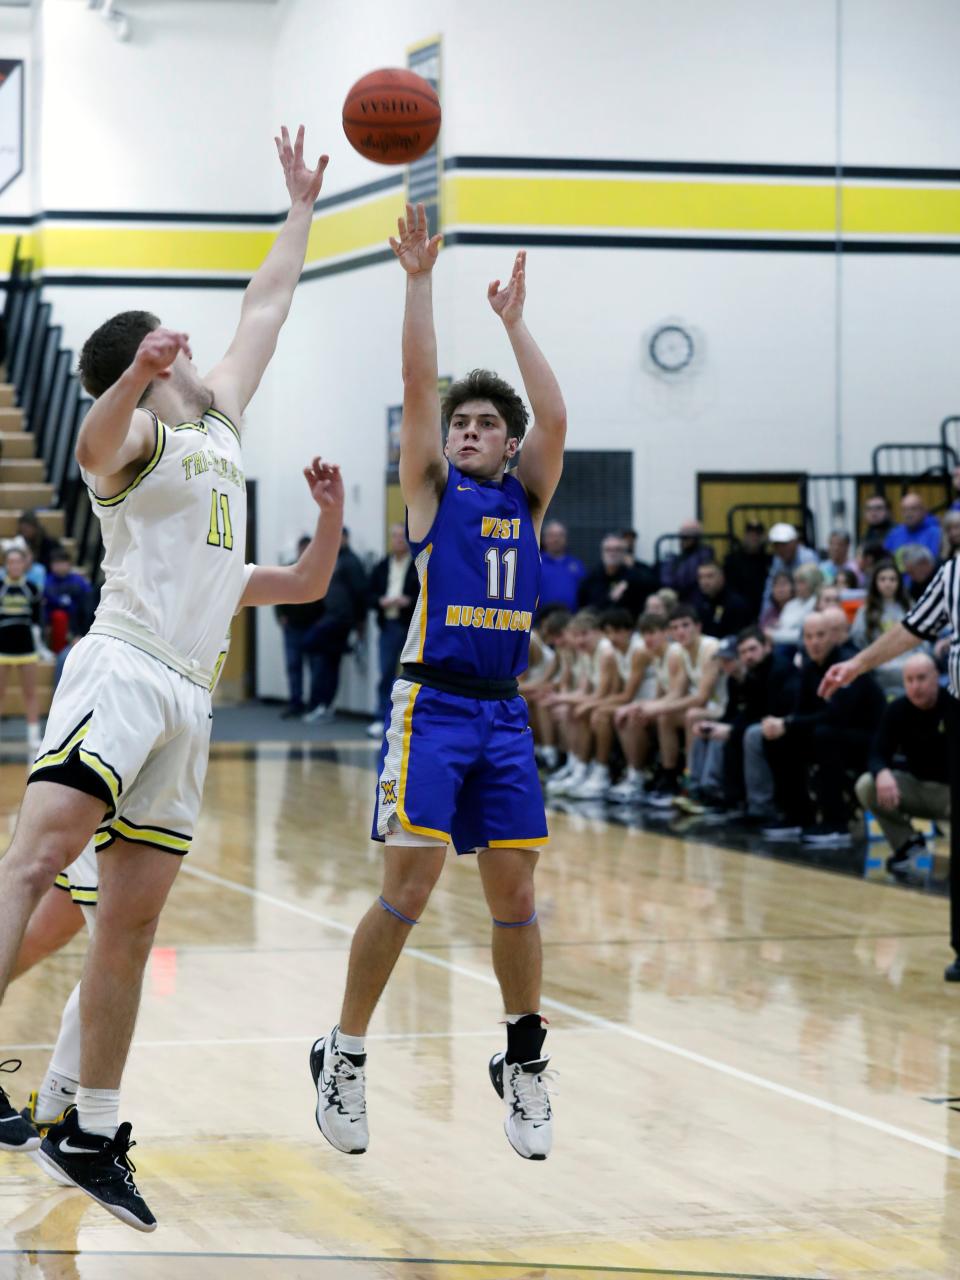 Jack Porter shoots a 3 during West Muskingum's 49-46 loss to host Tri-Valley on Tuesday night in Dresden. Porter finished with a team-high 15 points.